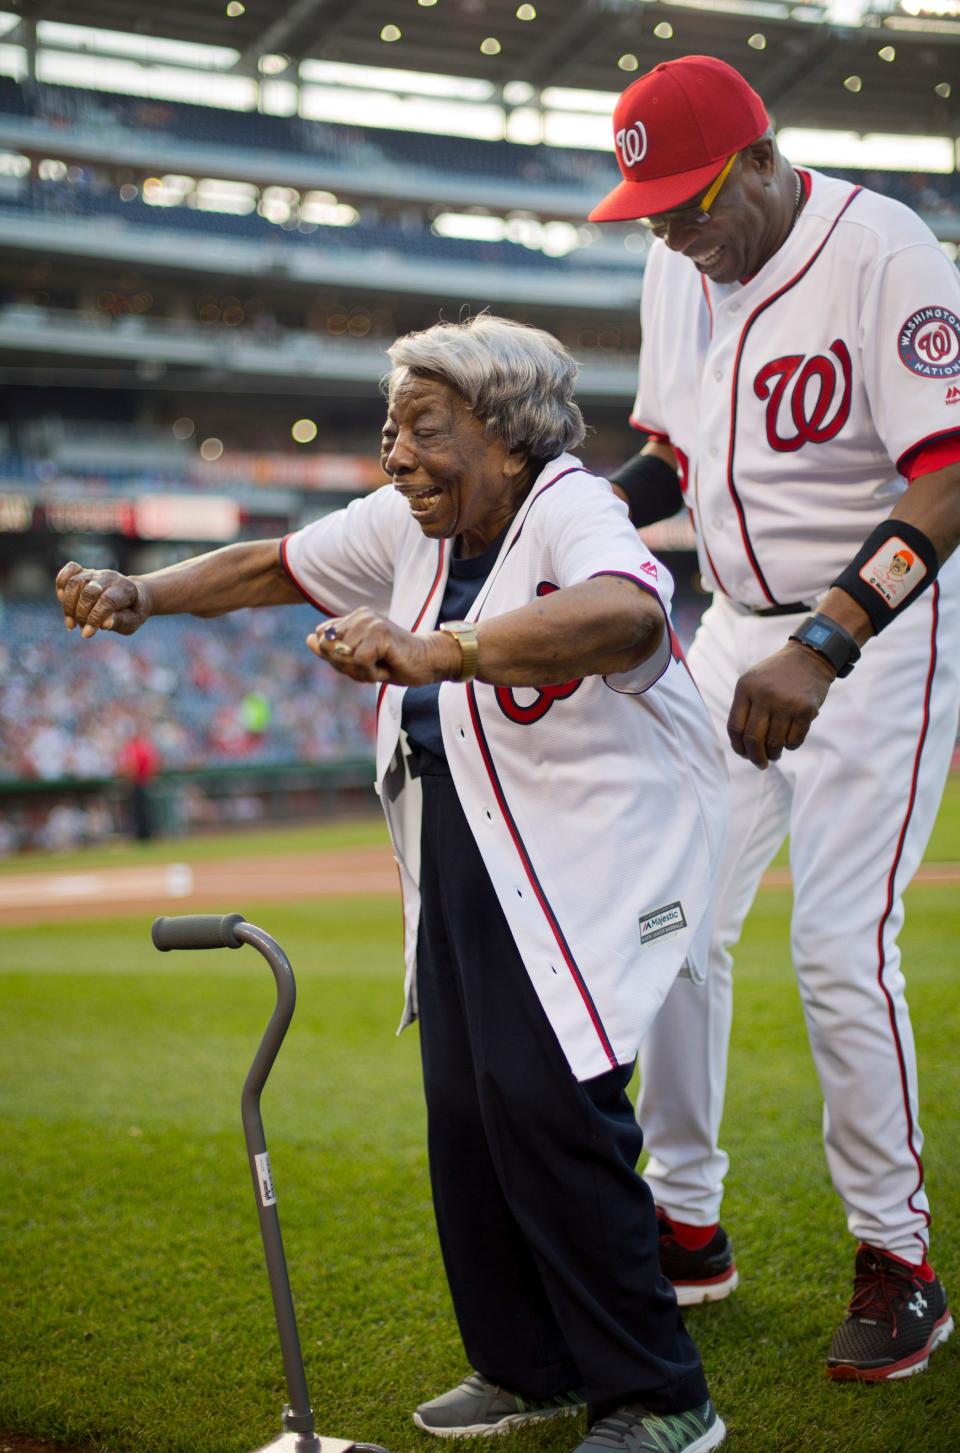 Virginia McLaurin, 107, reacts to receiving a team jersey from Washington Nationals manager Dusty Baker before the Nationals' baseball game against the St. Louis Cardinals at Nationals Park, Thursday, May 26, 2016, in Washington. McLaurin gained Internet fame for her impromptu dance with President Barack Obama in February during a Black History Month reception at the White House and said afterward that she could finally die happy.